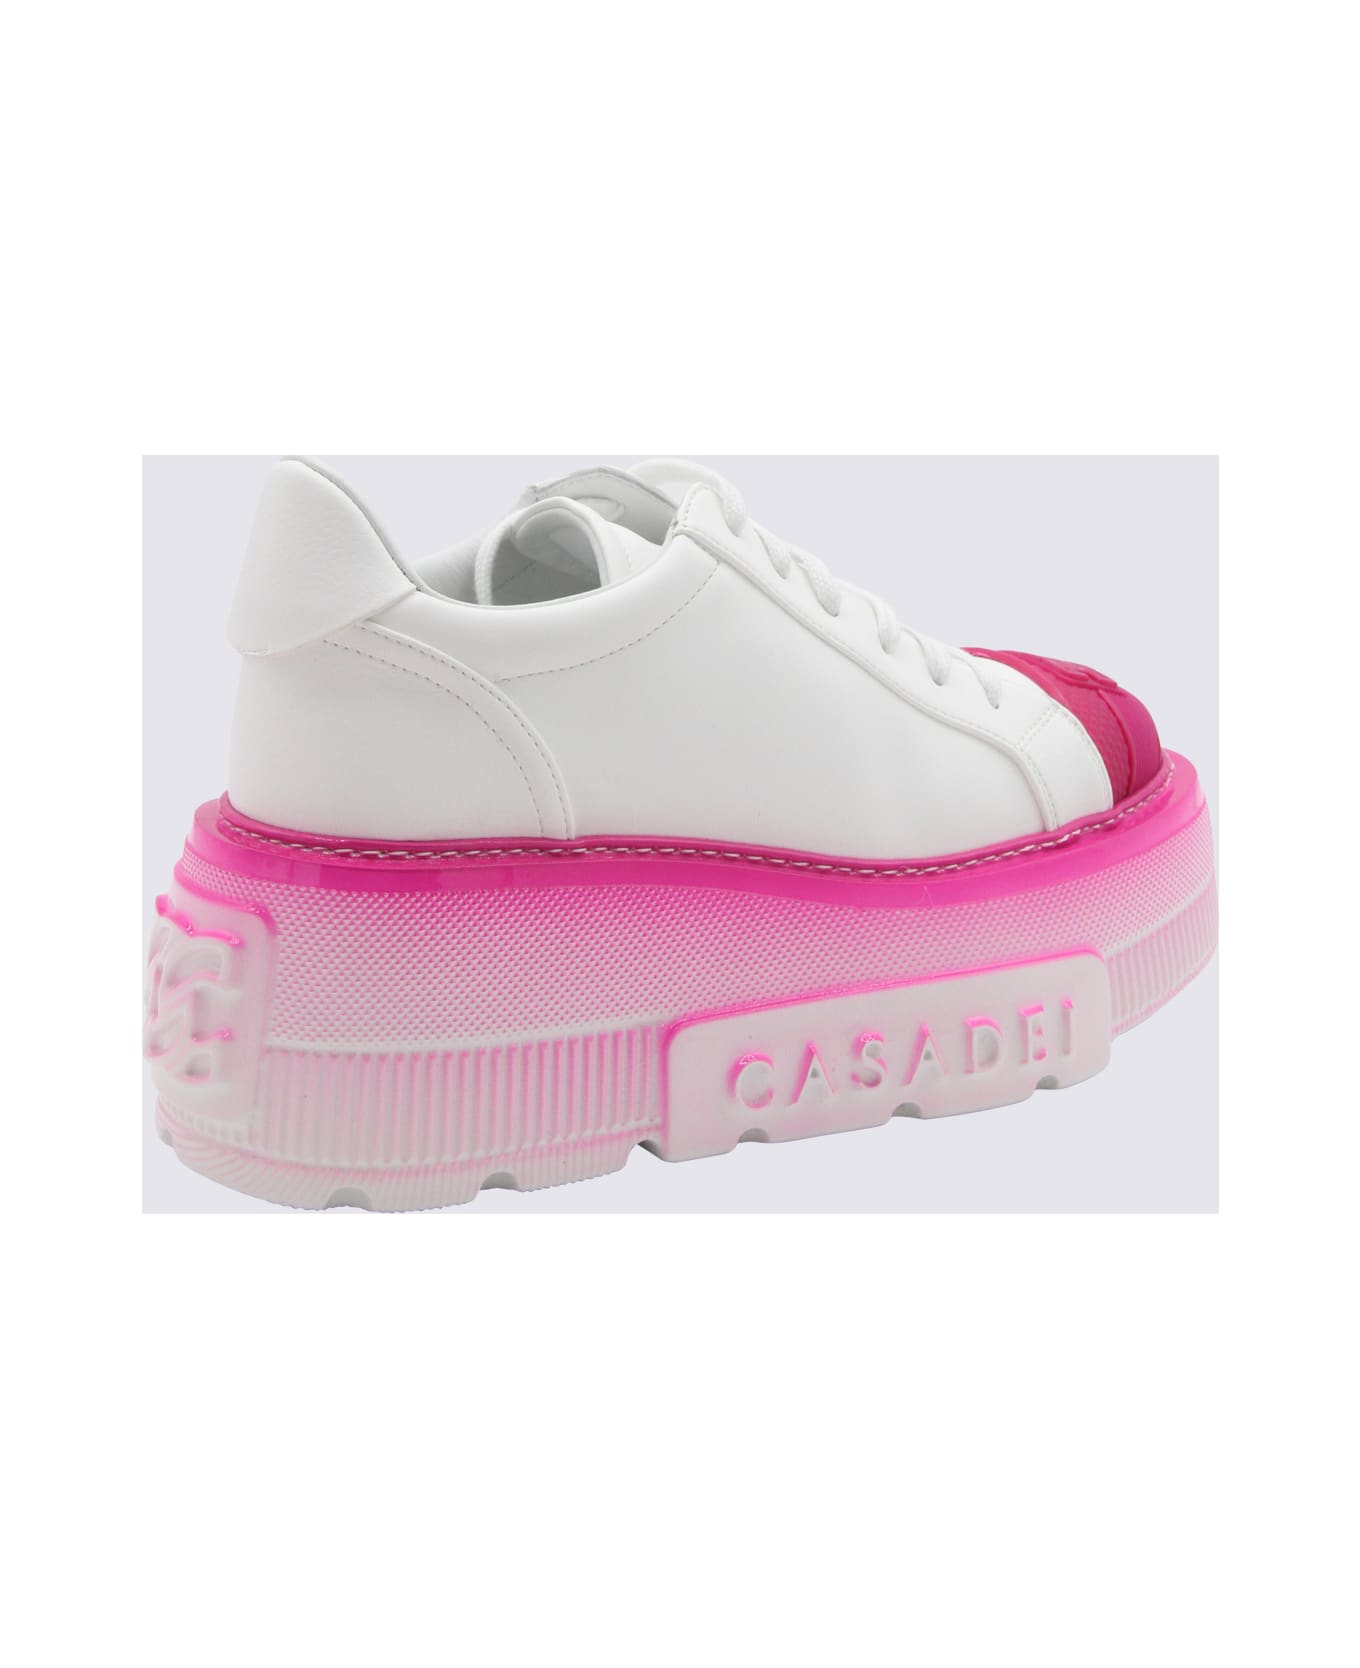 Casadei White And Pink Leather Sneakers - WHITE/FUCHSIA ウェッジシューズ